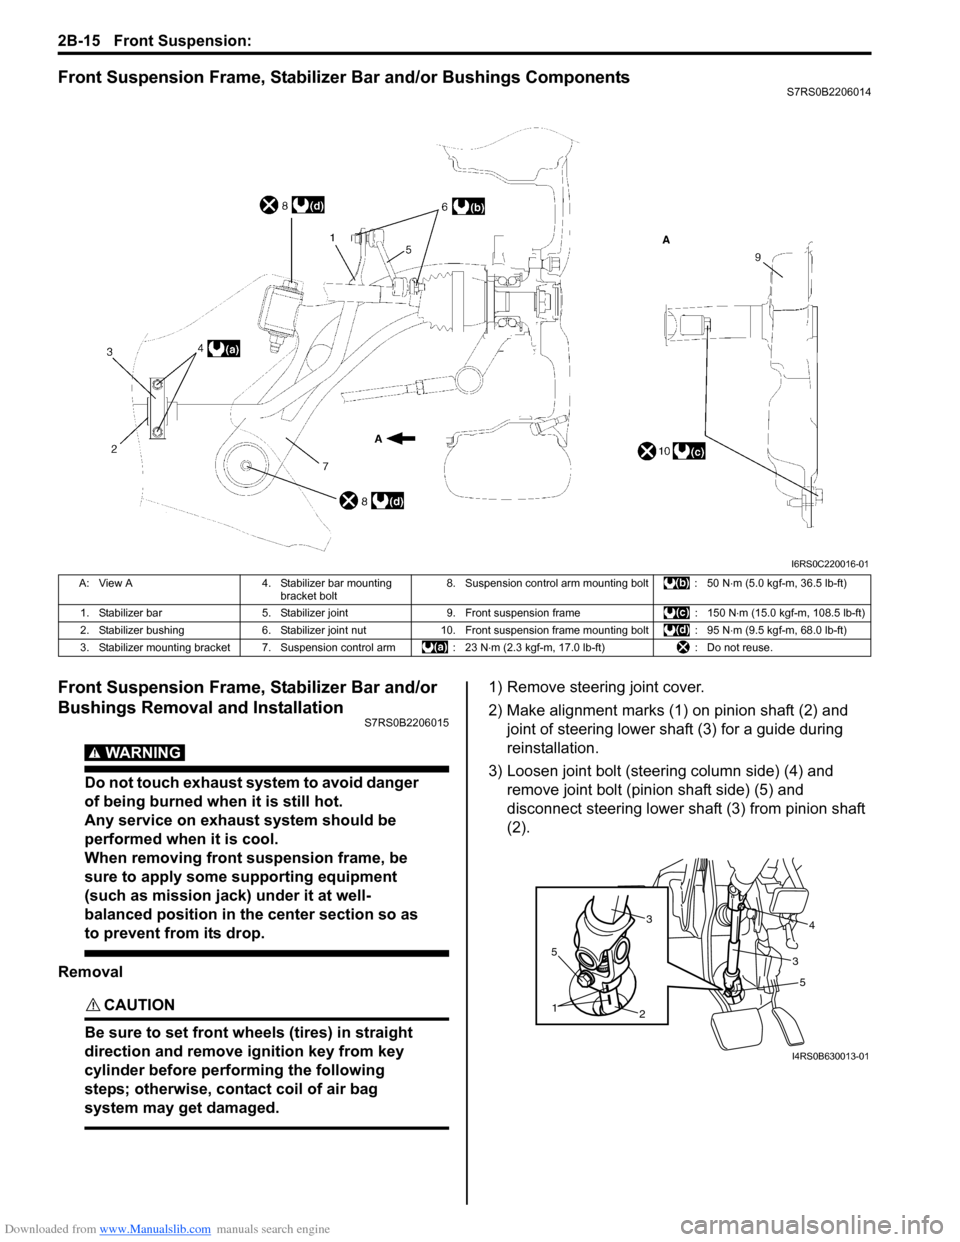 SUZUKI SWIFT 2005 2.G Service Workshop Manual Downloaded from www.Manualslib.com manuals search engine 2B-15 Front Suspension: 
Front Suspension Frame, Stabilizer Bar and/or Bushings ComponentsS7RS0B2206014
Front Suspension Frame, Stabilizer Bar 